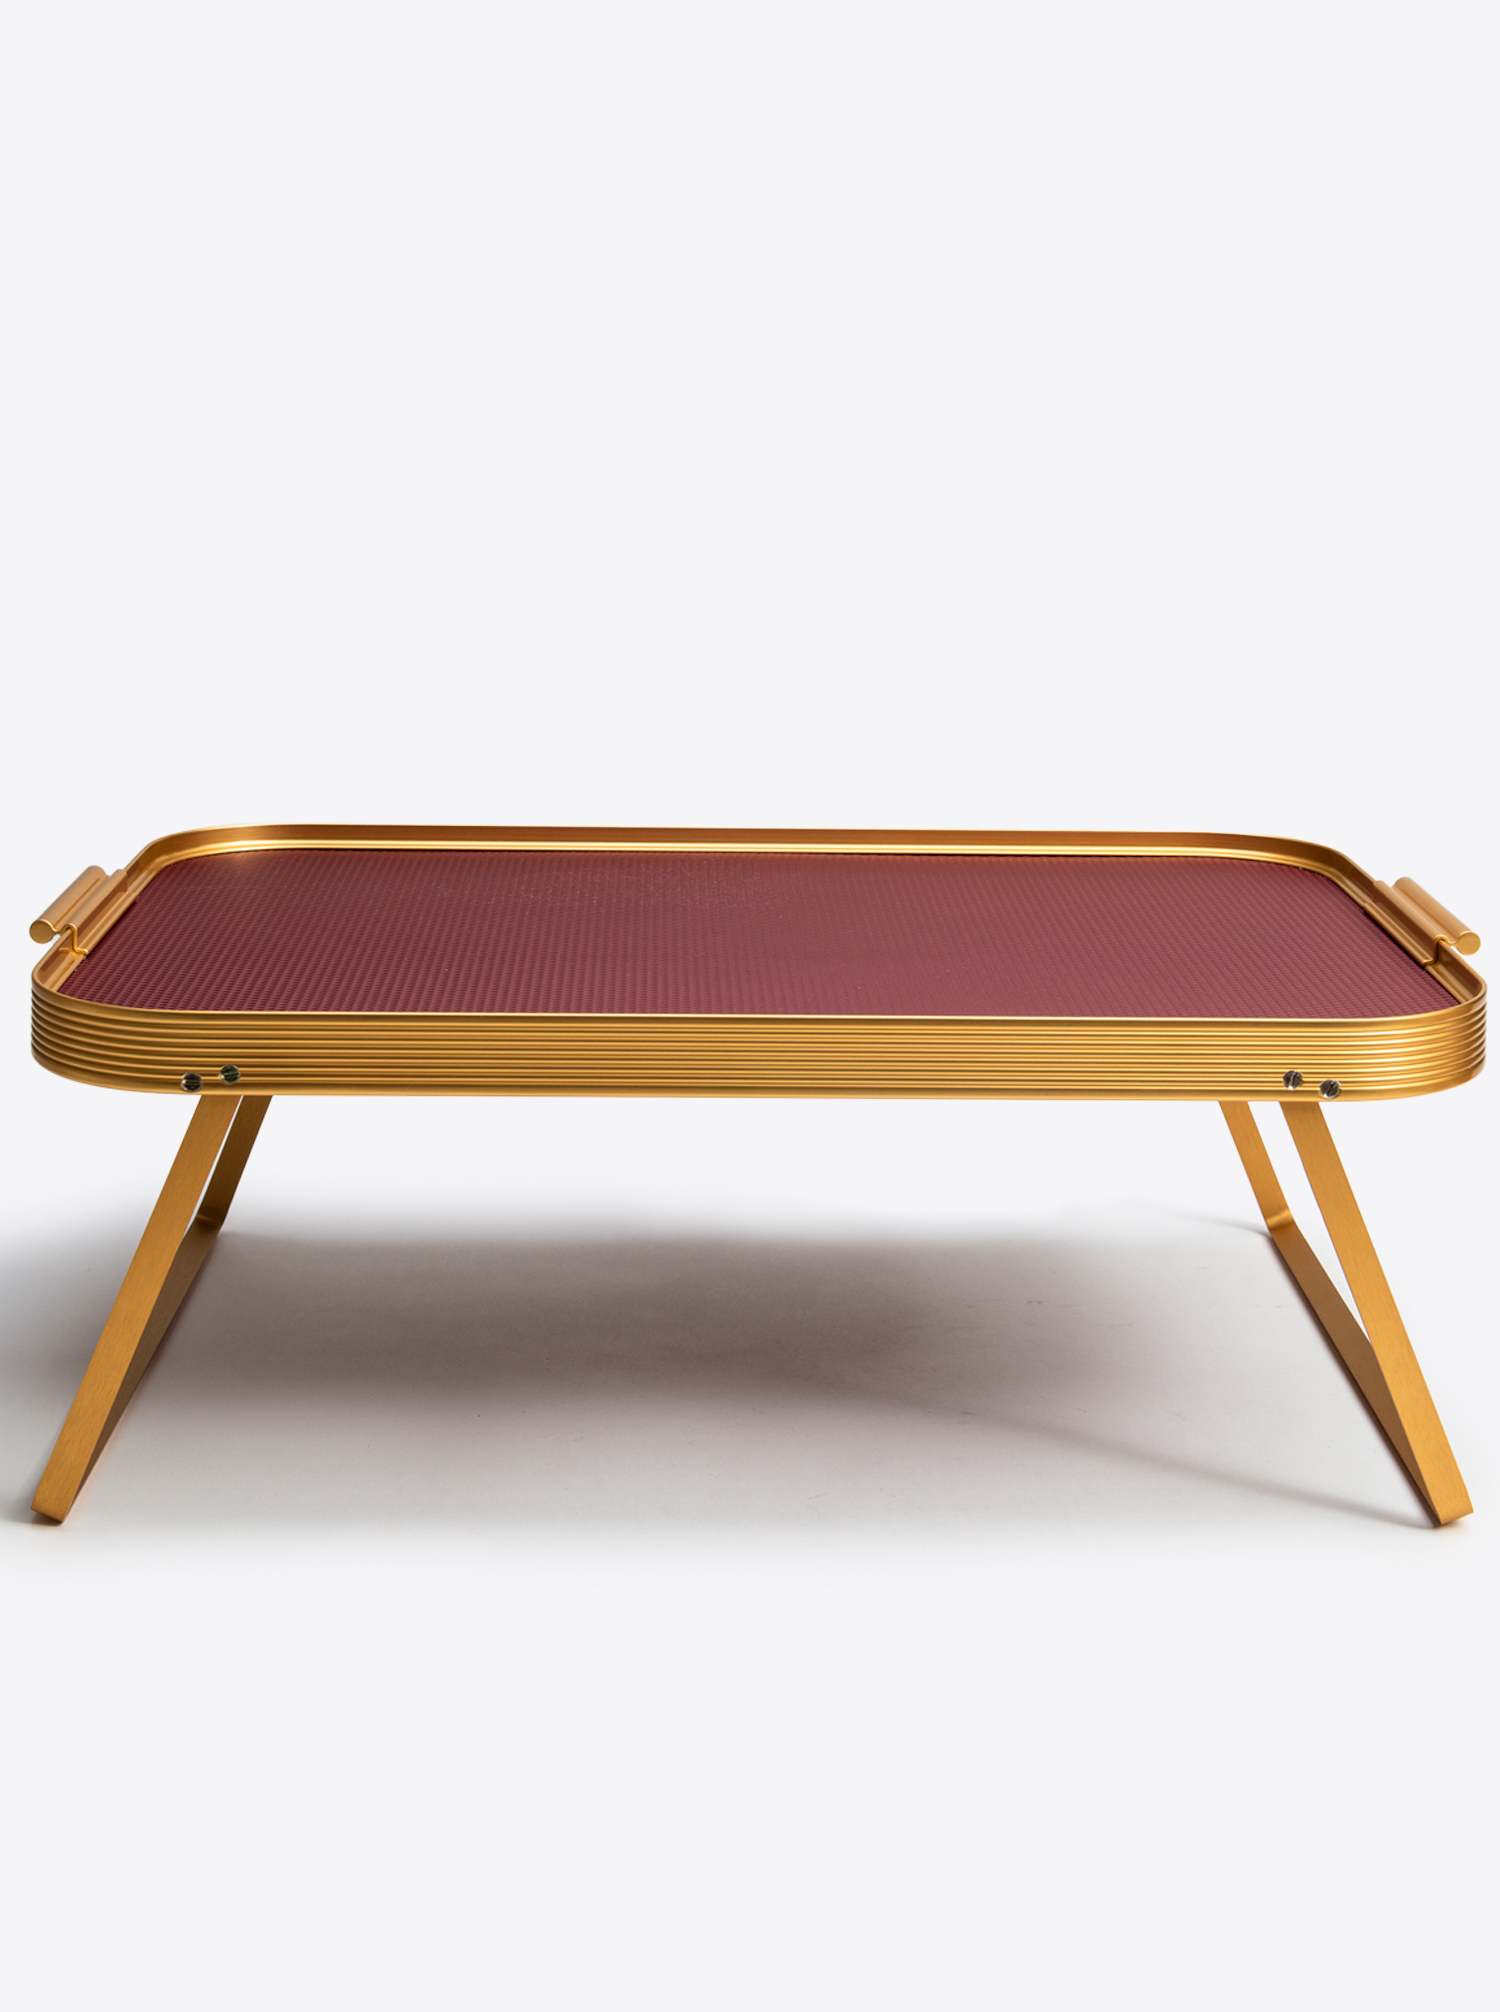 Bed Tray 51 x 33 cm / Lap Tray &quot;Burgundy&quot;